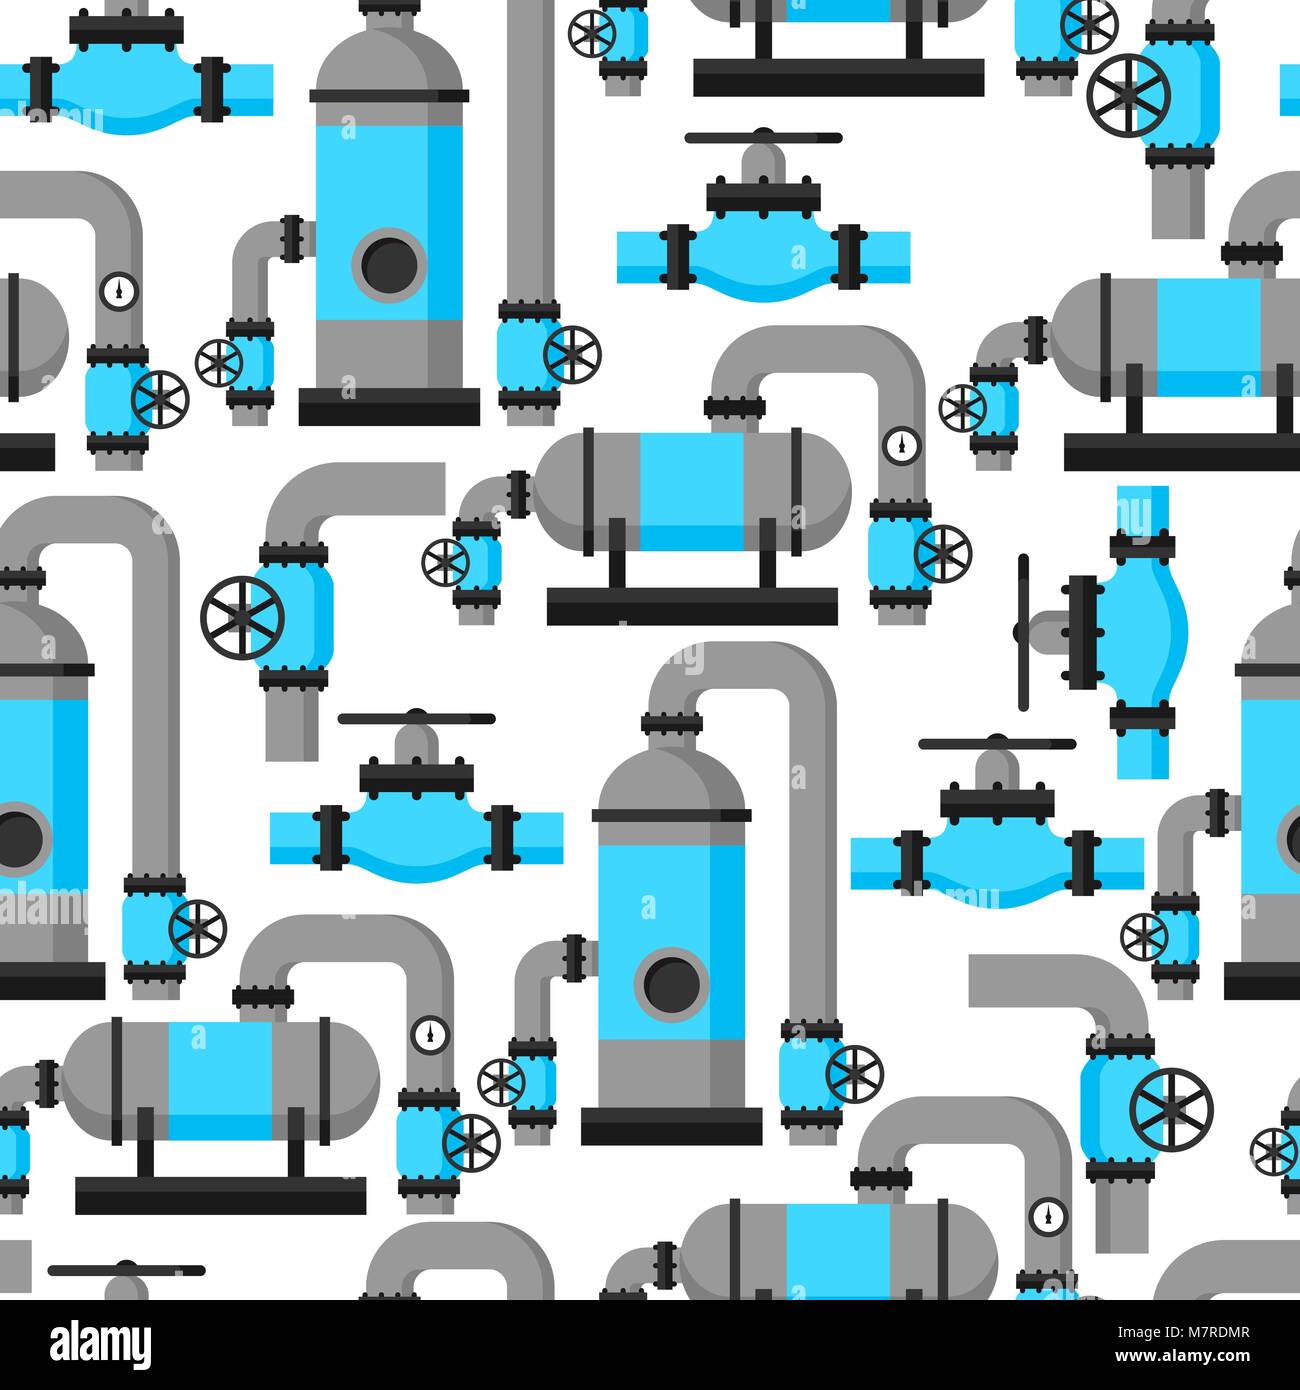 Natural gas heat exchanger, control valves and storage. Industrial seamless pattern Stock Vector